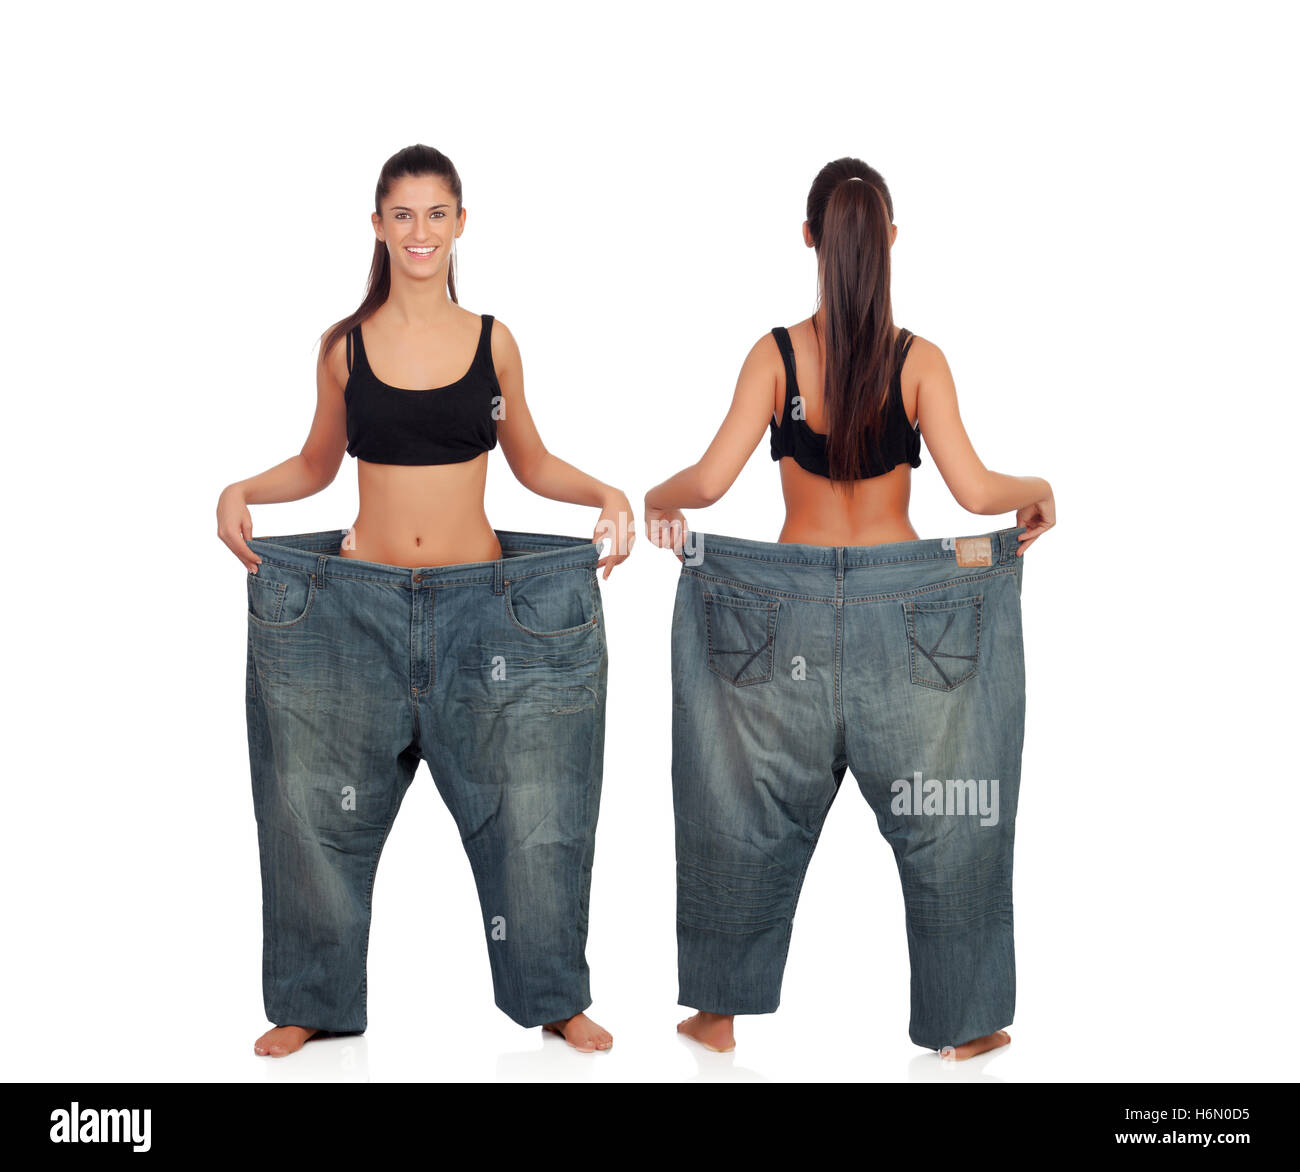 View ahead and behind thin girl with big pants isolated on a white background Stock Photo